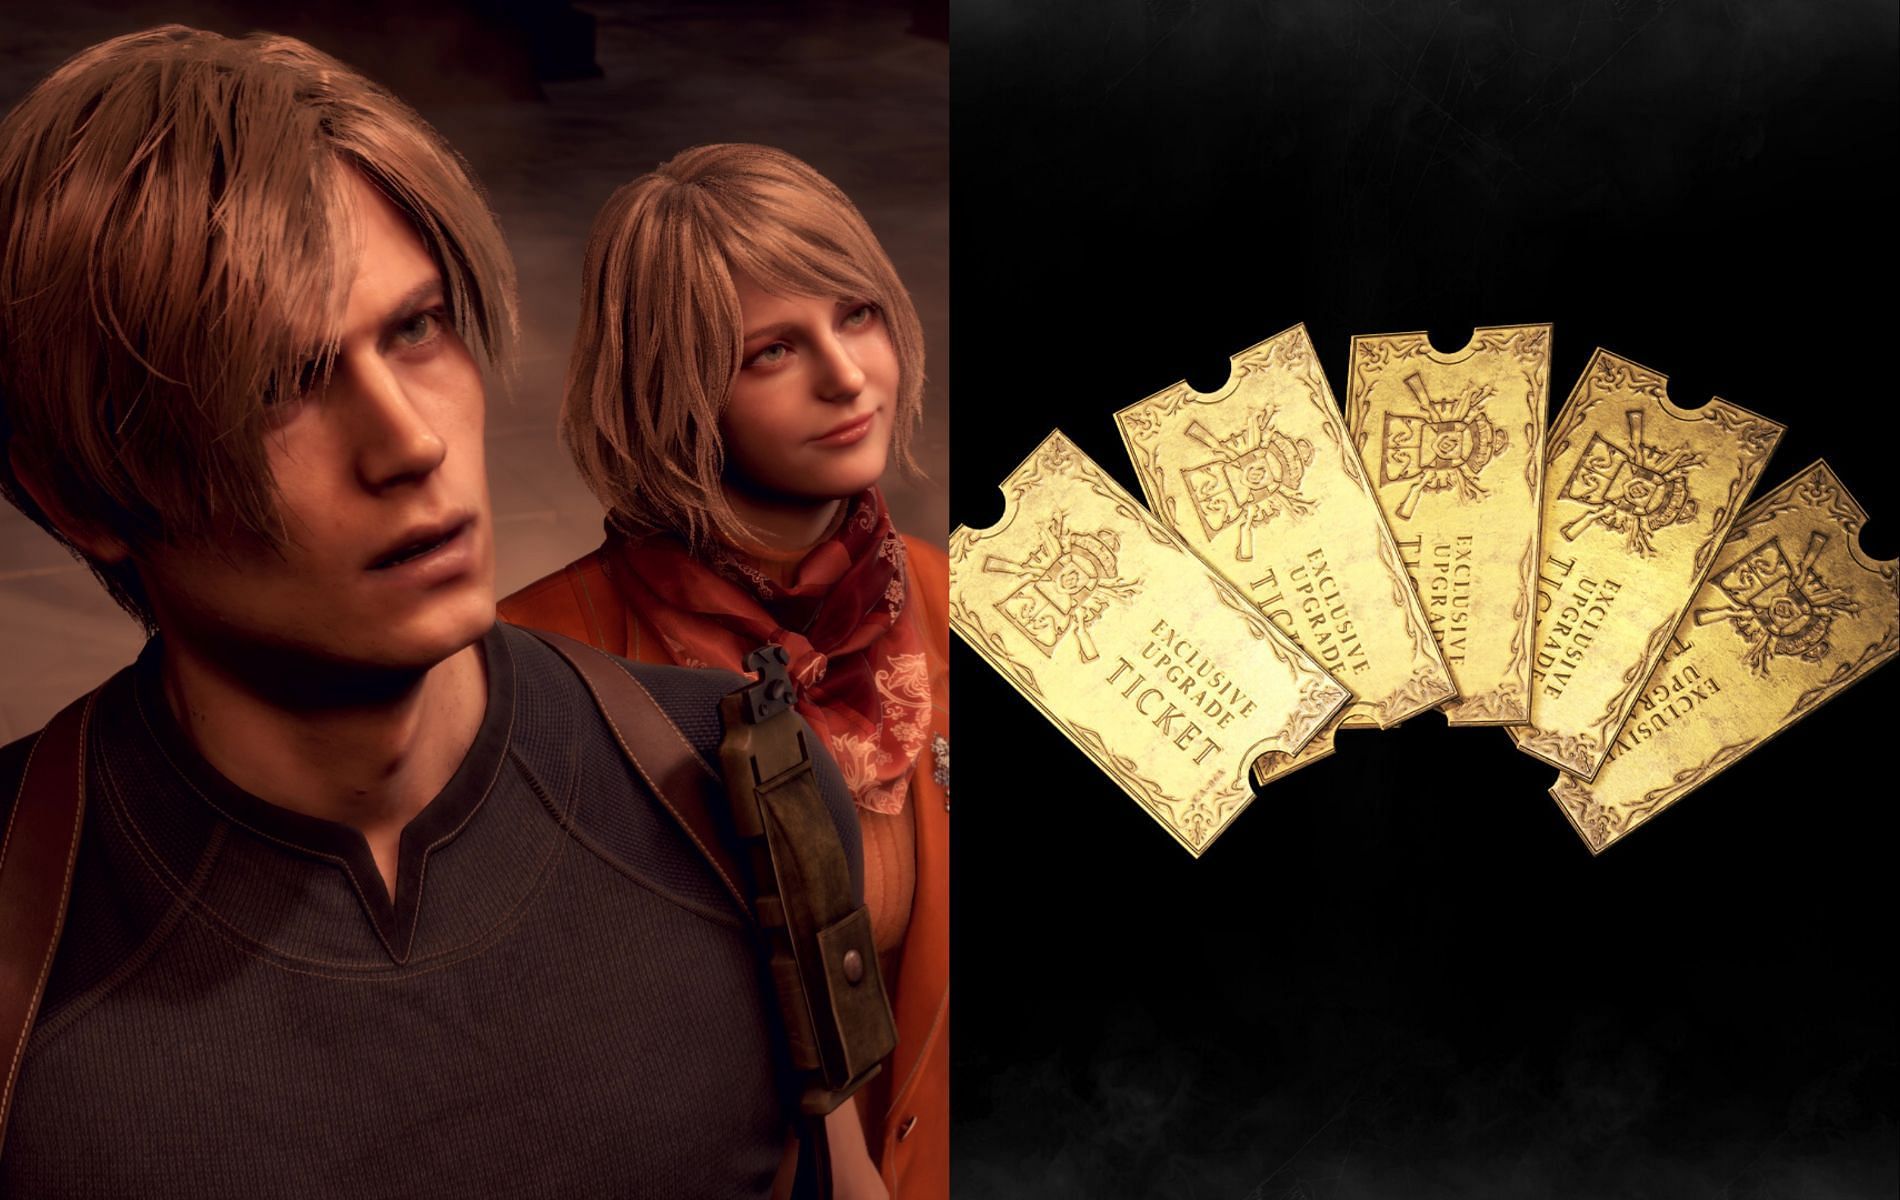 Resident Evil 4 remake gets new weapon upgrade microtransactions